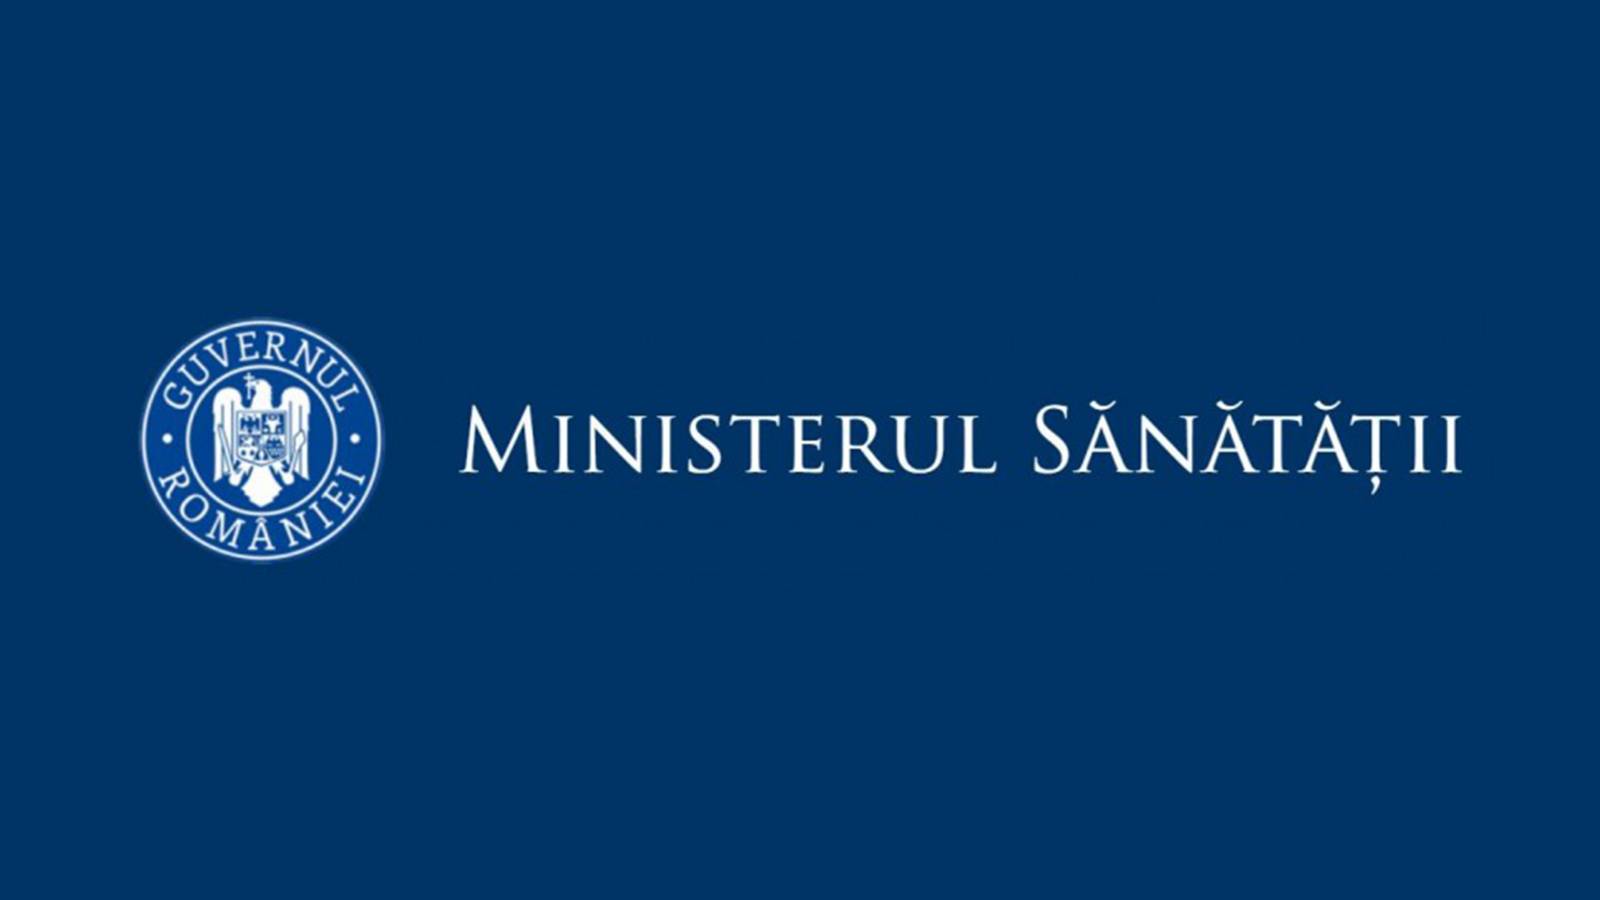 Ministry of Health Cases Romania Variants of SARS-CoV-2 Concern